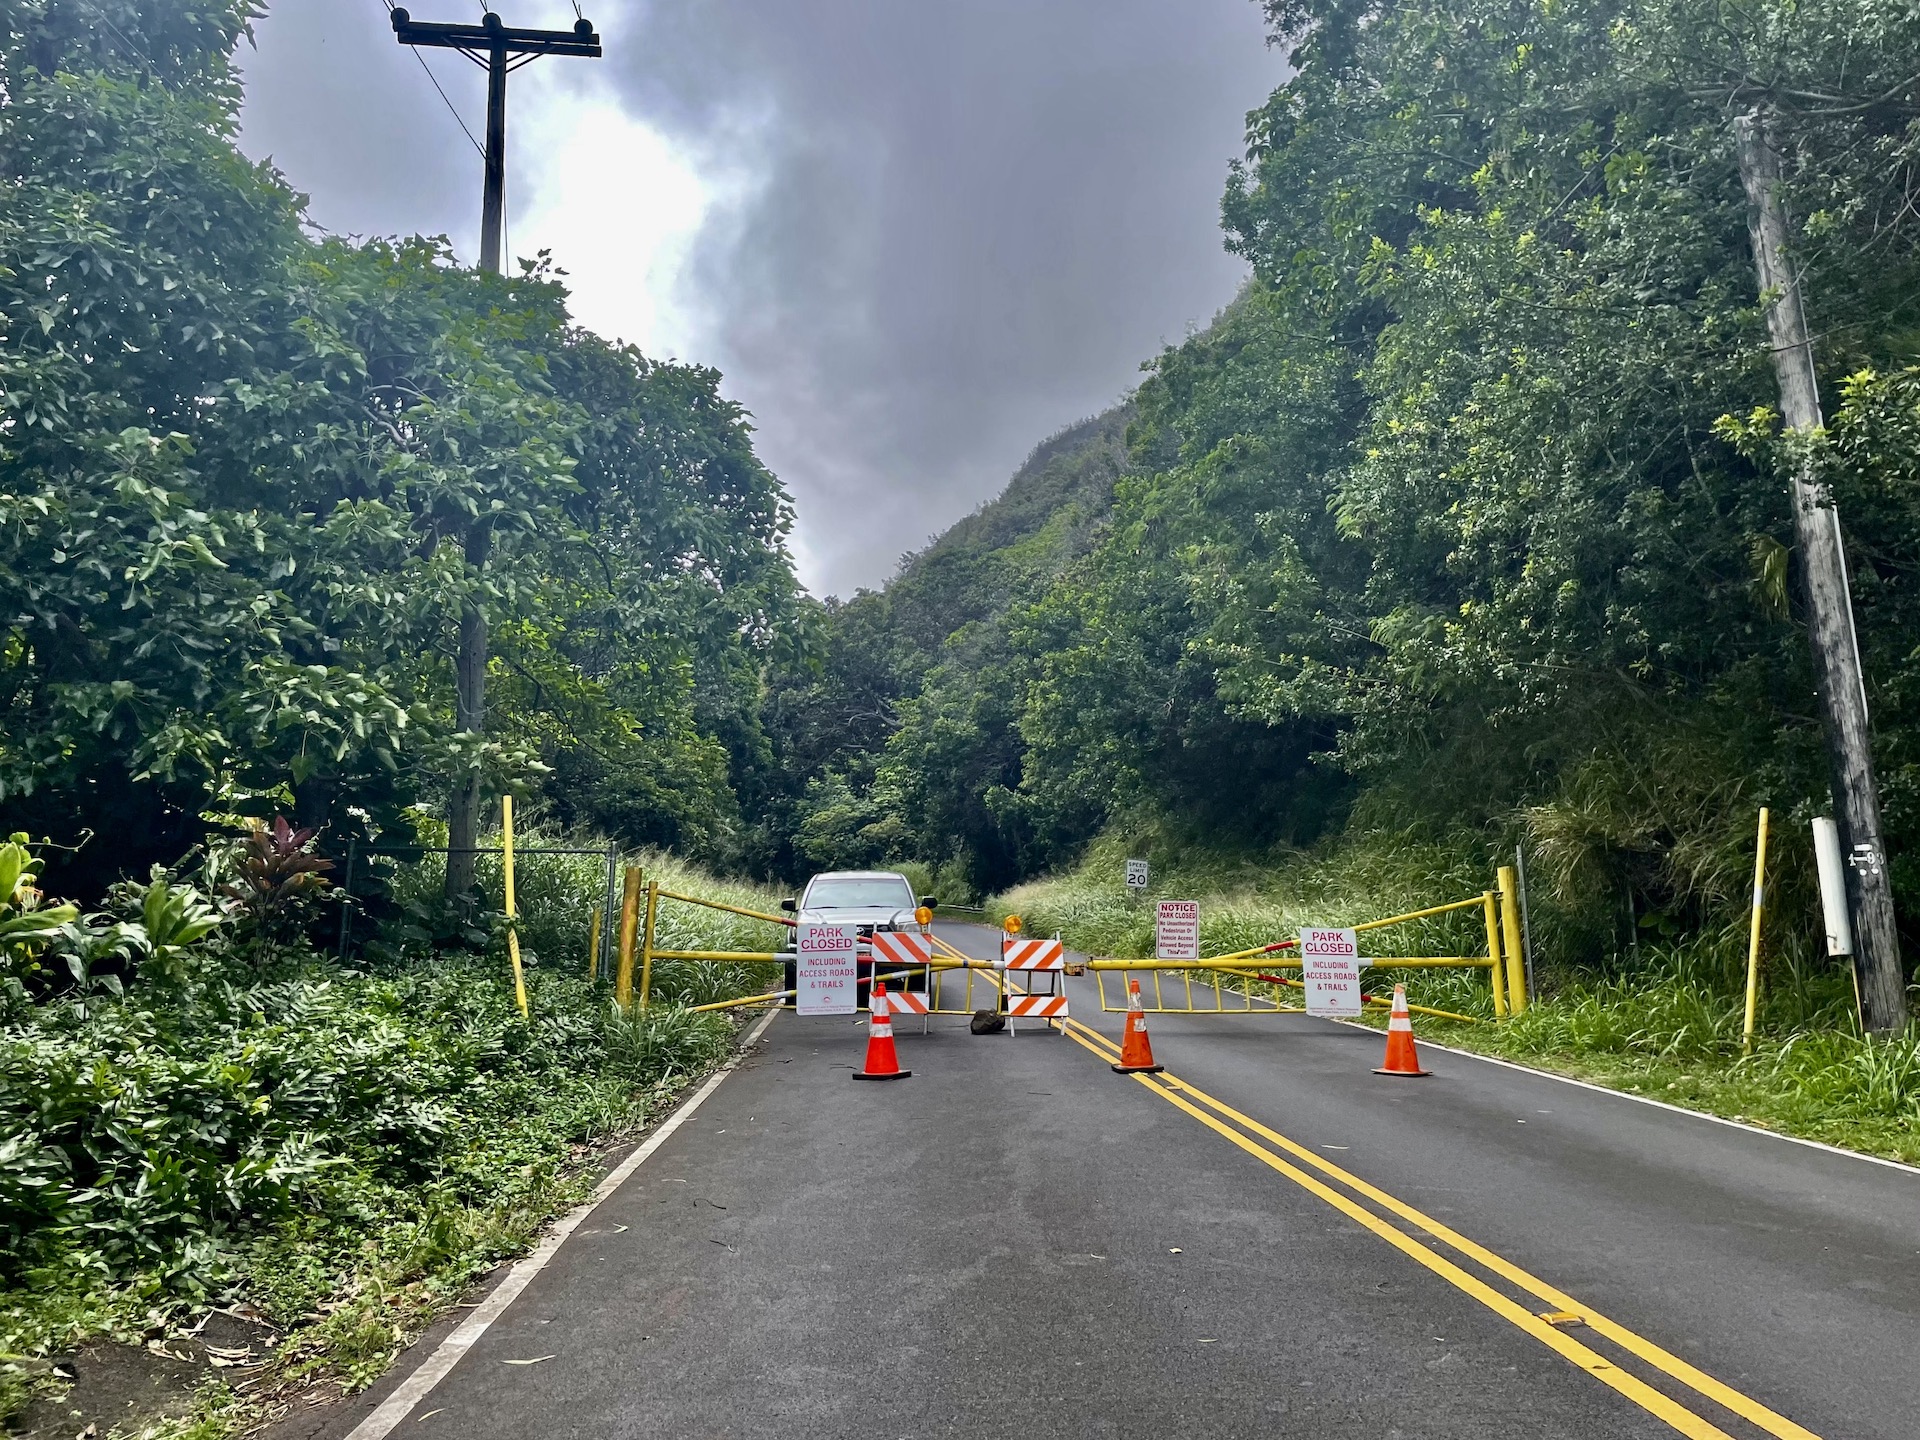 Iao Valley Closed Gate, Central Maui. Travel Pono, Don't Enter Restricted Areas